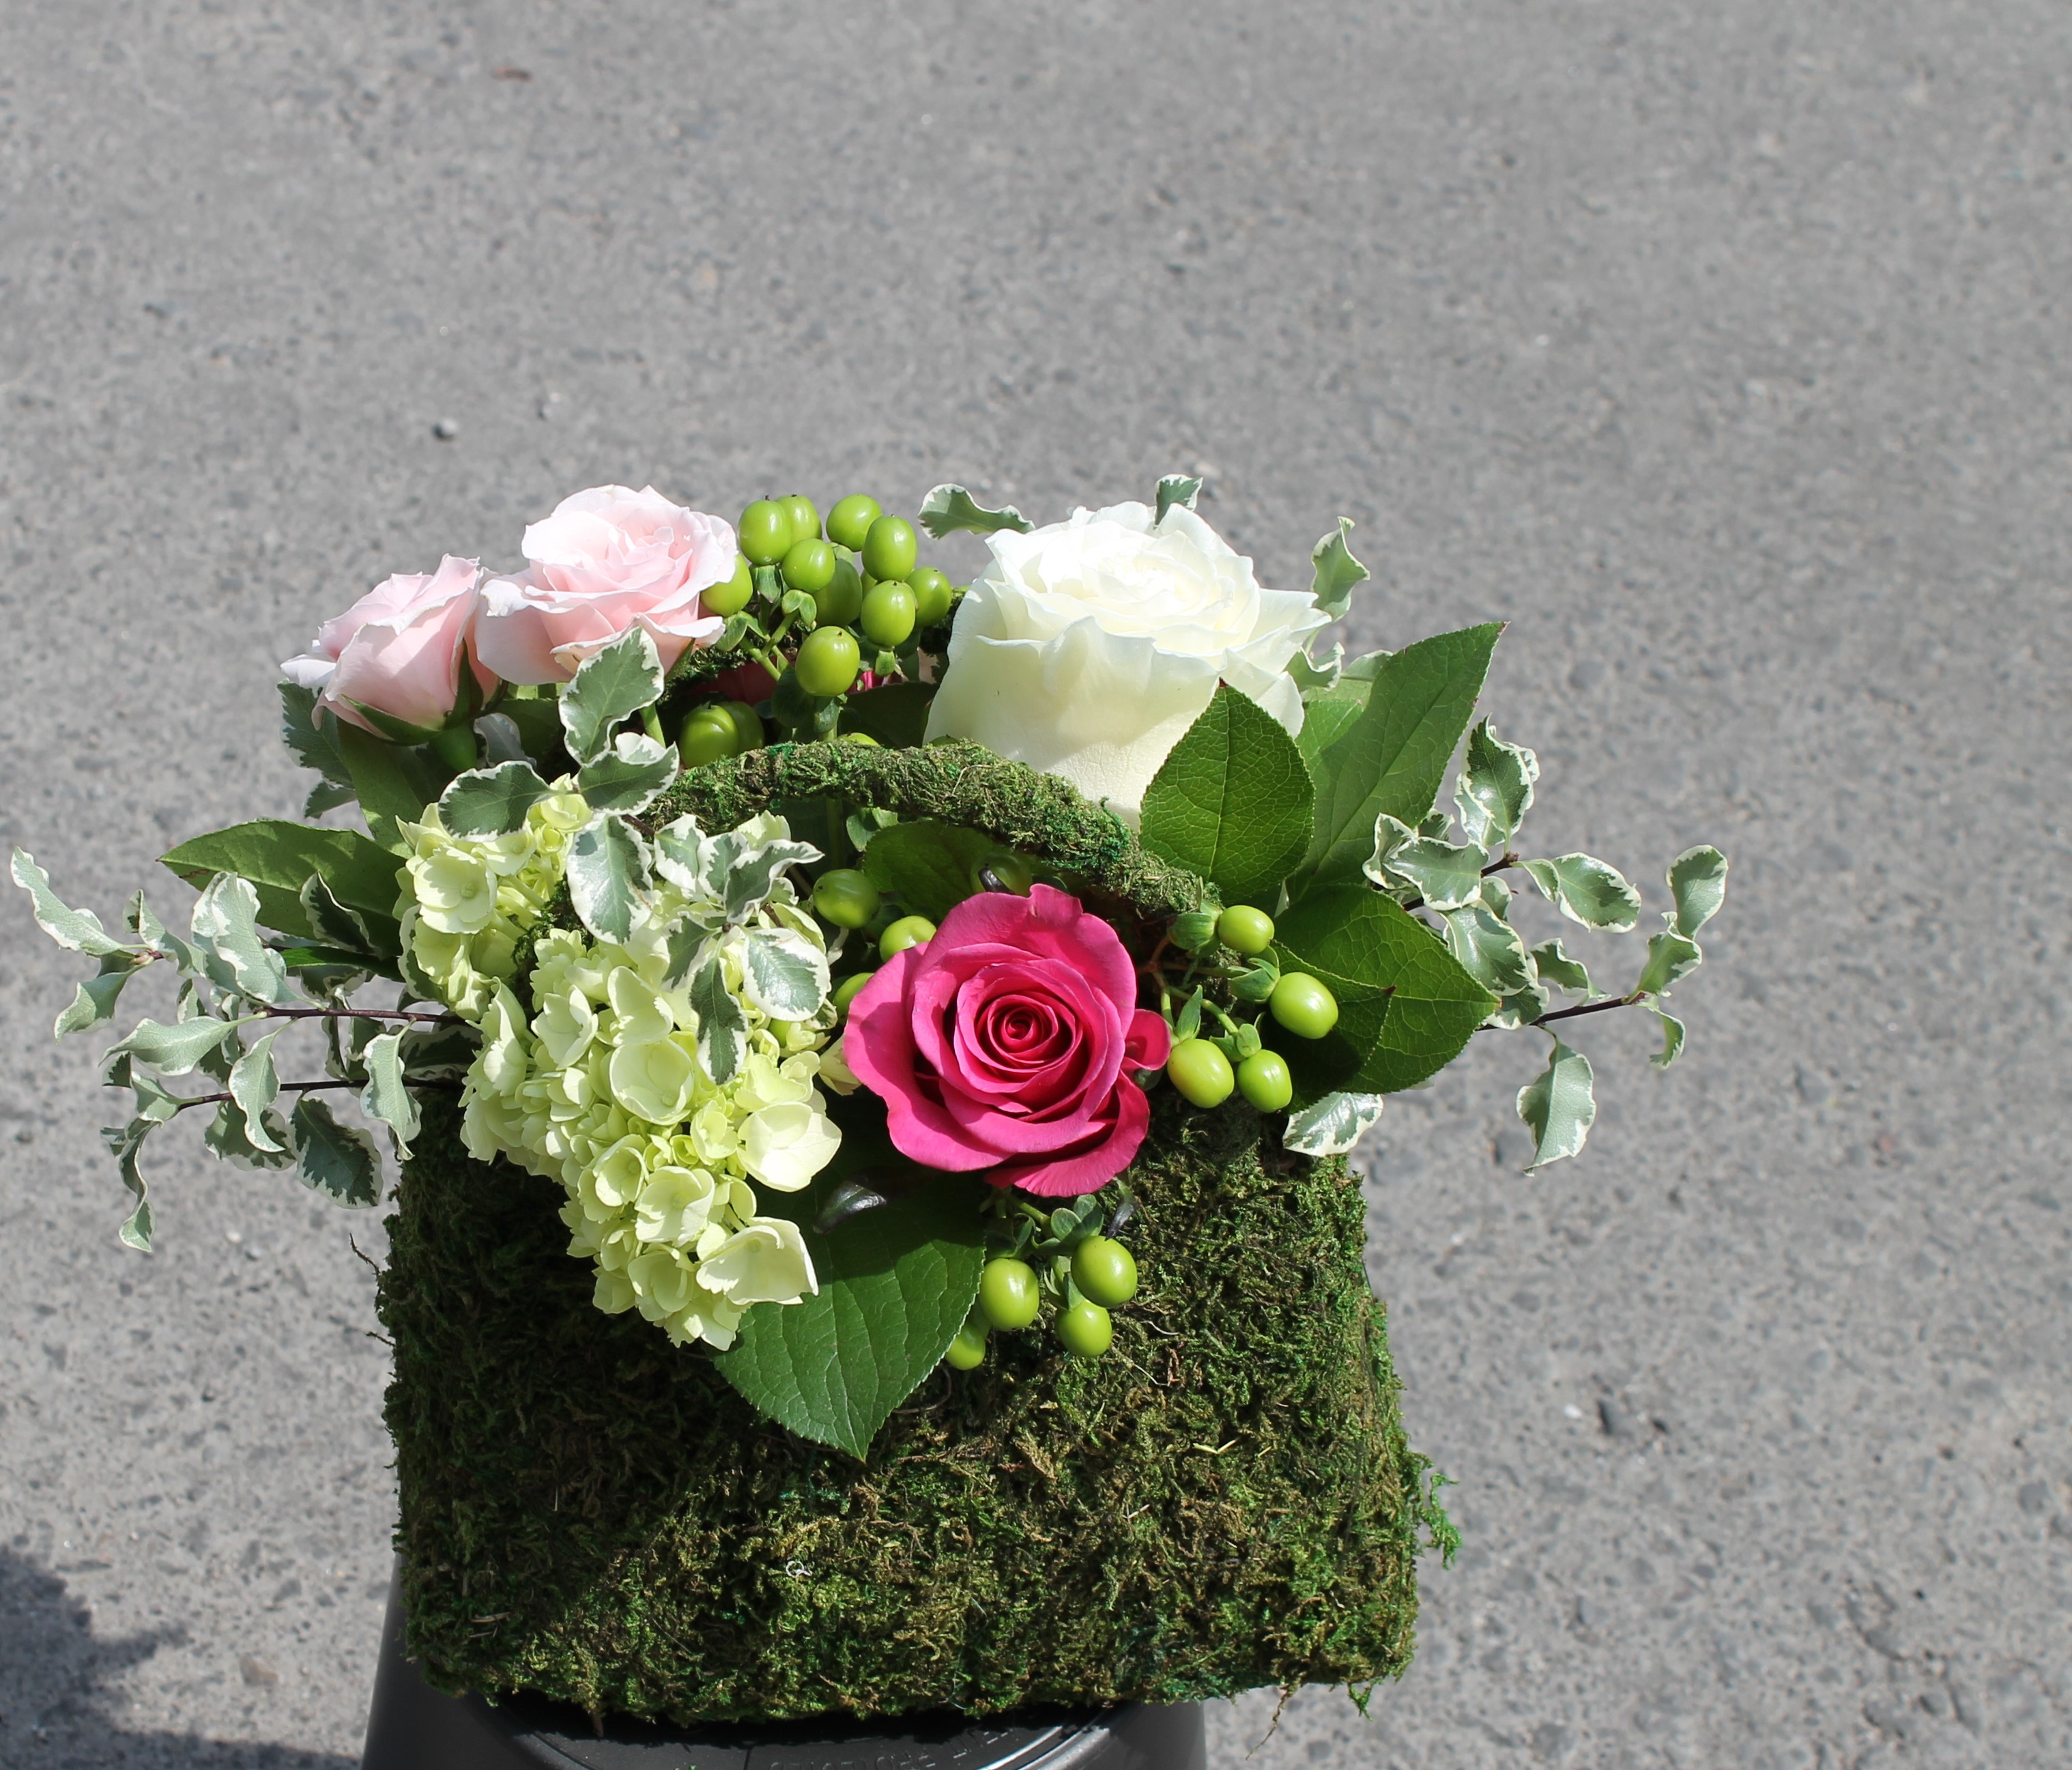 A Floral Moss Purse - Martin's, the Flower People